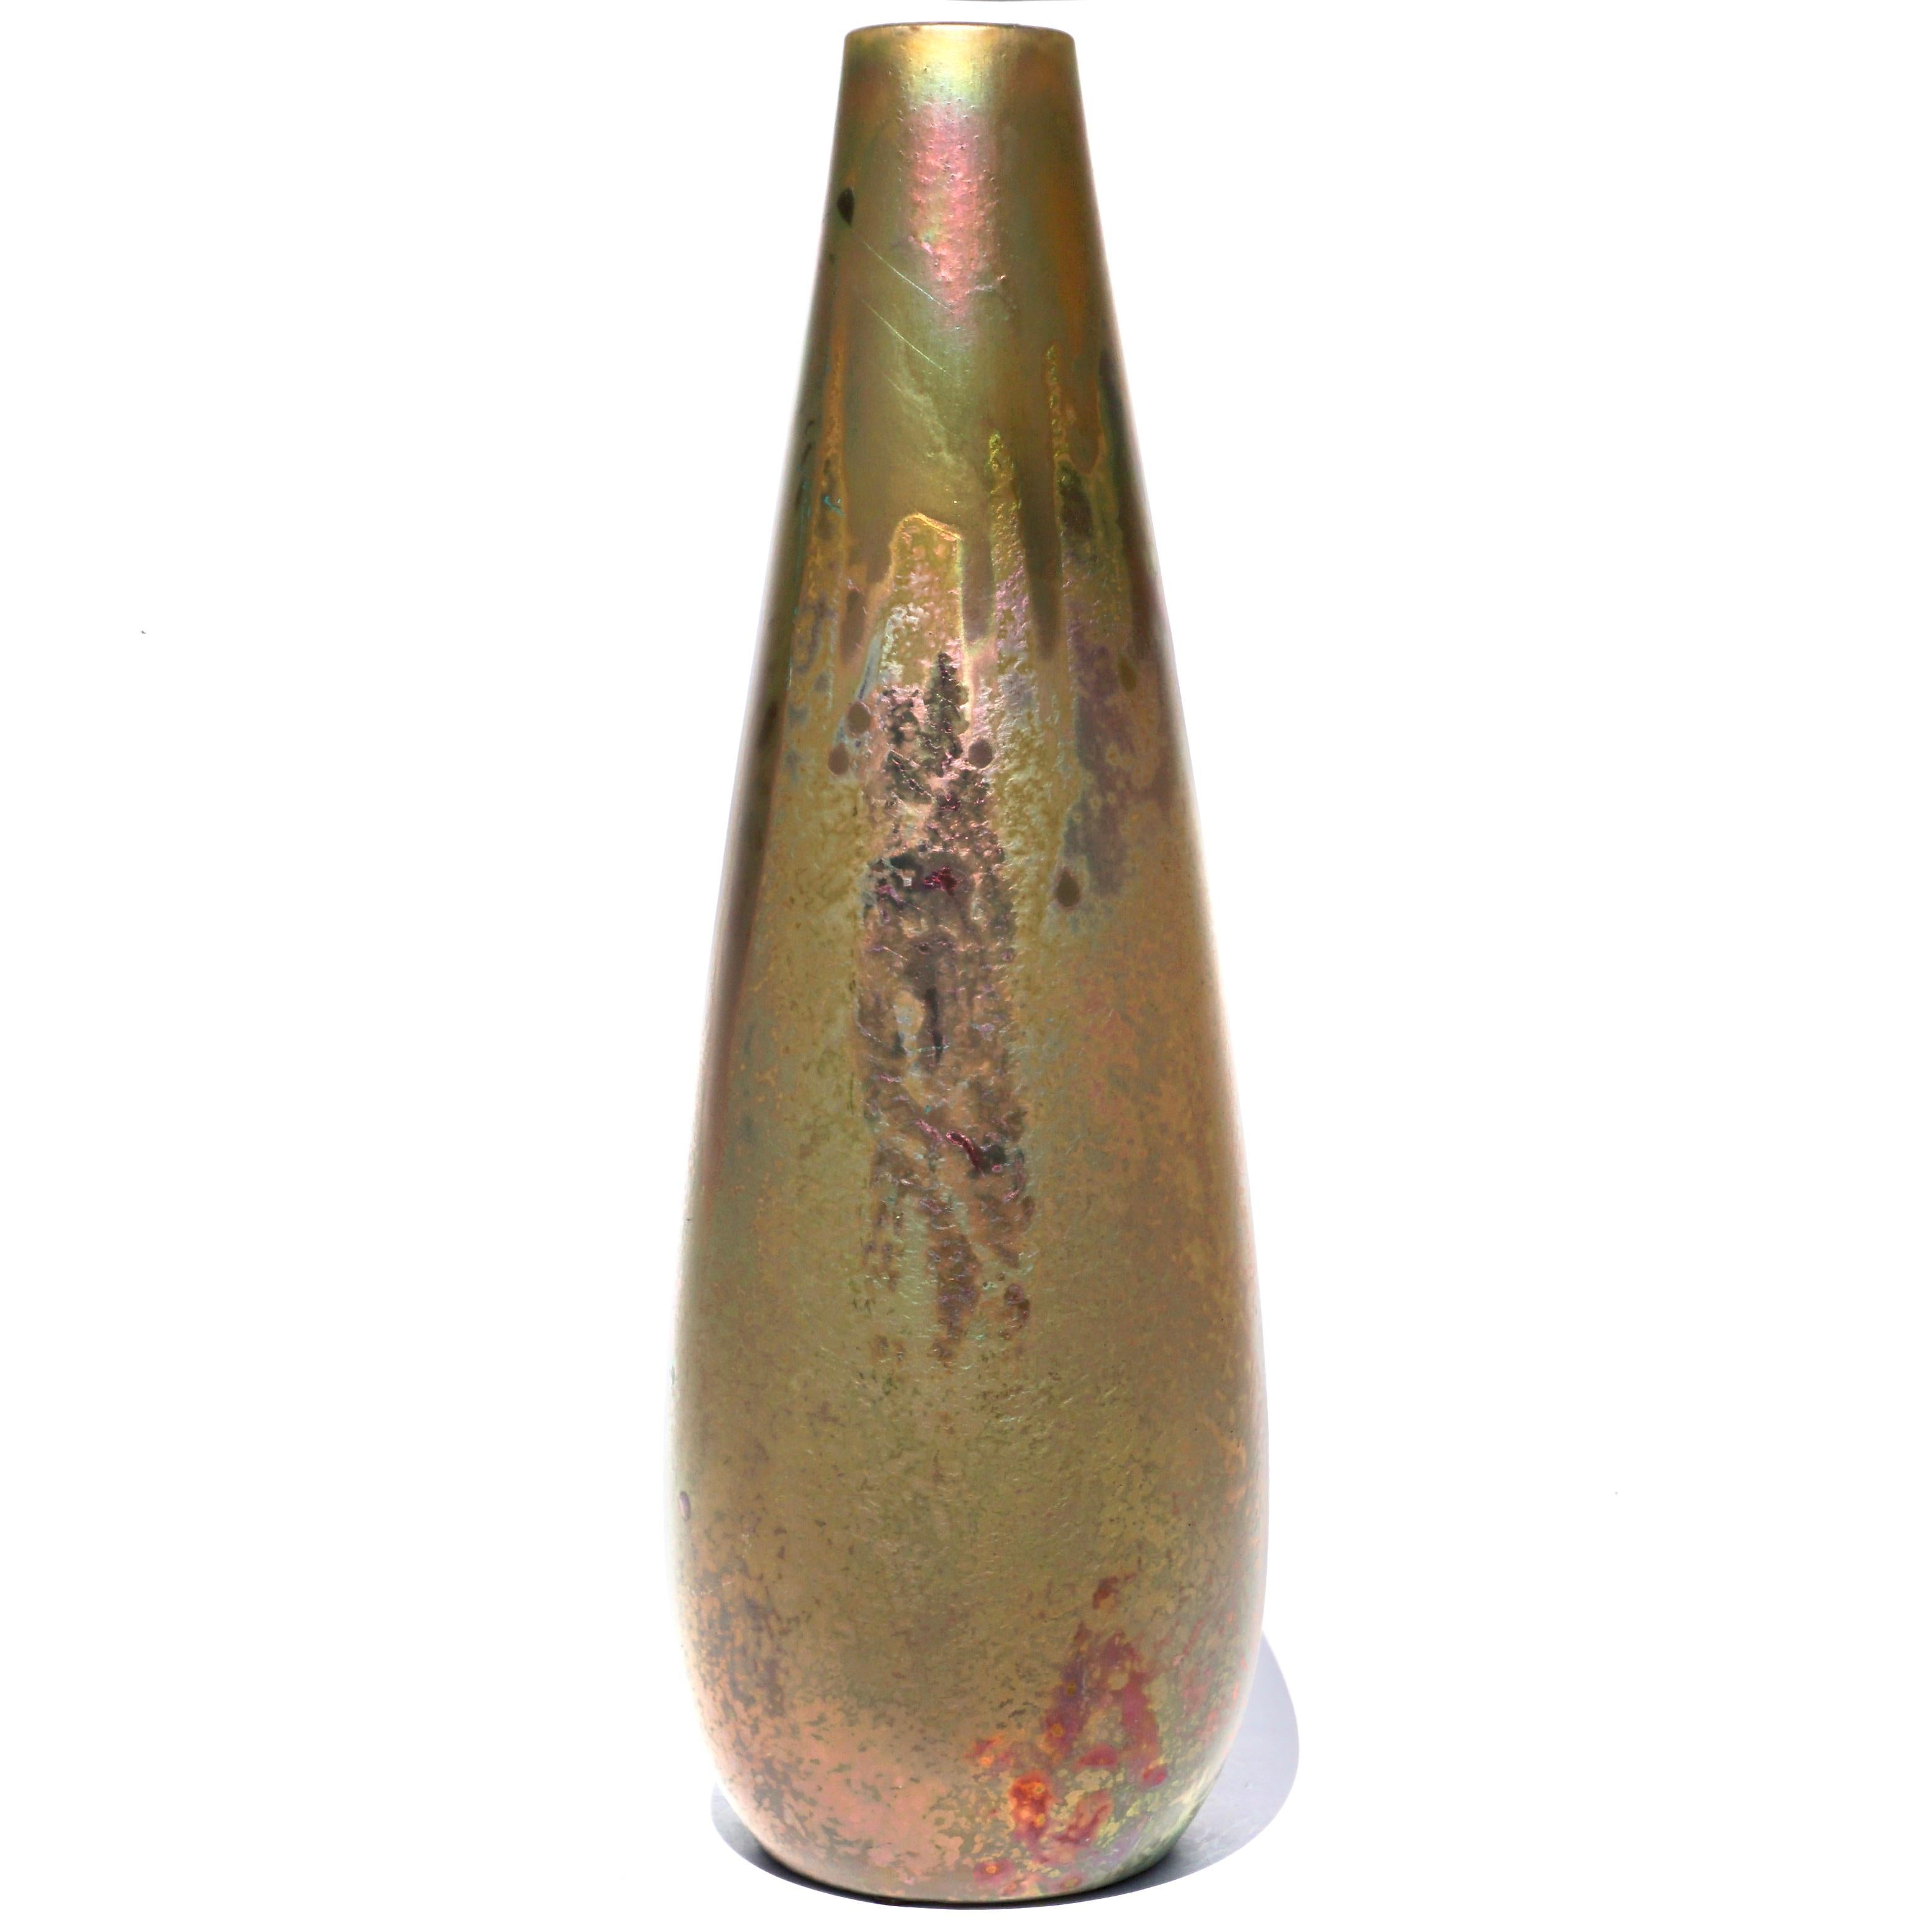 A monumental ceramic vase with iridescent glaze in an elongated bulbous shape by the legendary French ceramist Pierre Clement Massier (1845-1917). 

Massier is widely considered as the founder the modern ceramic industry of Vallauris, Southern